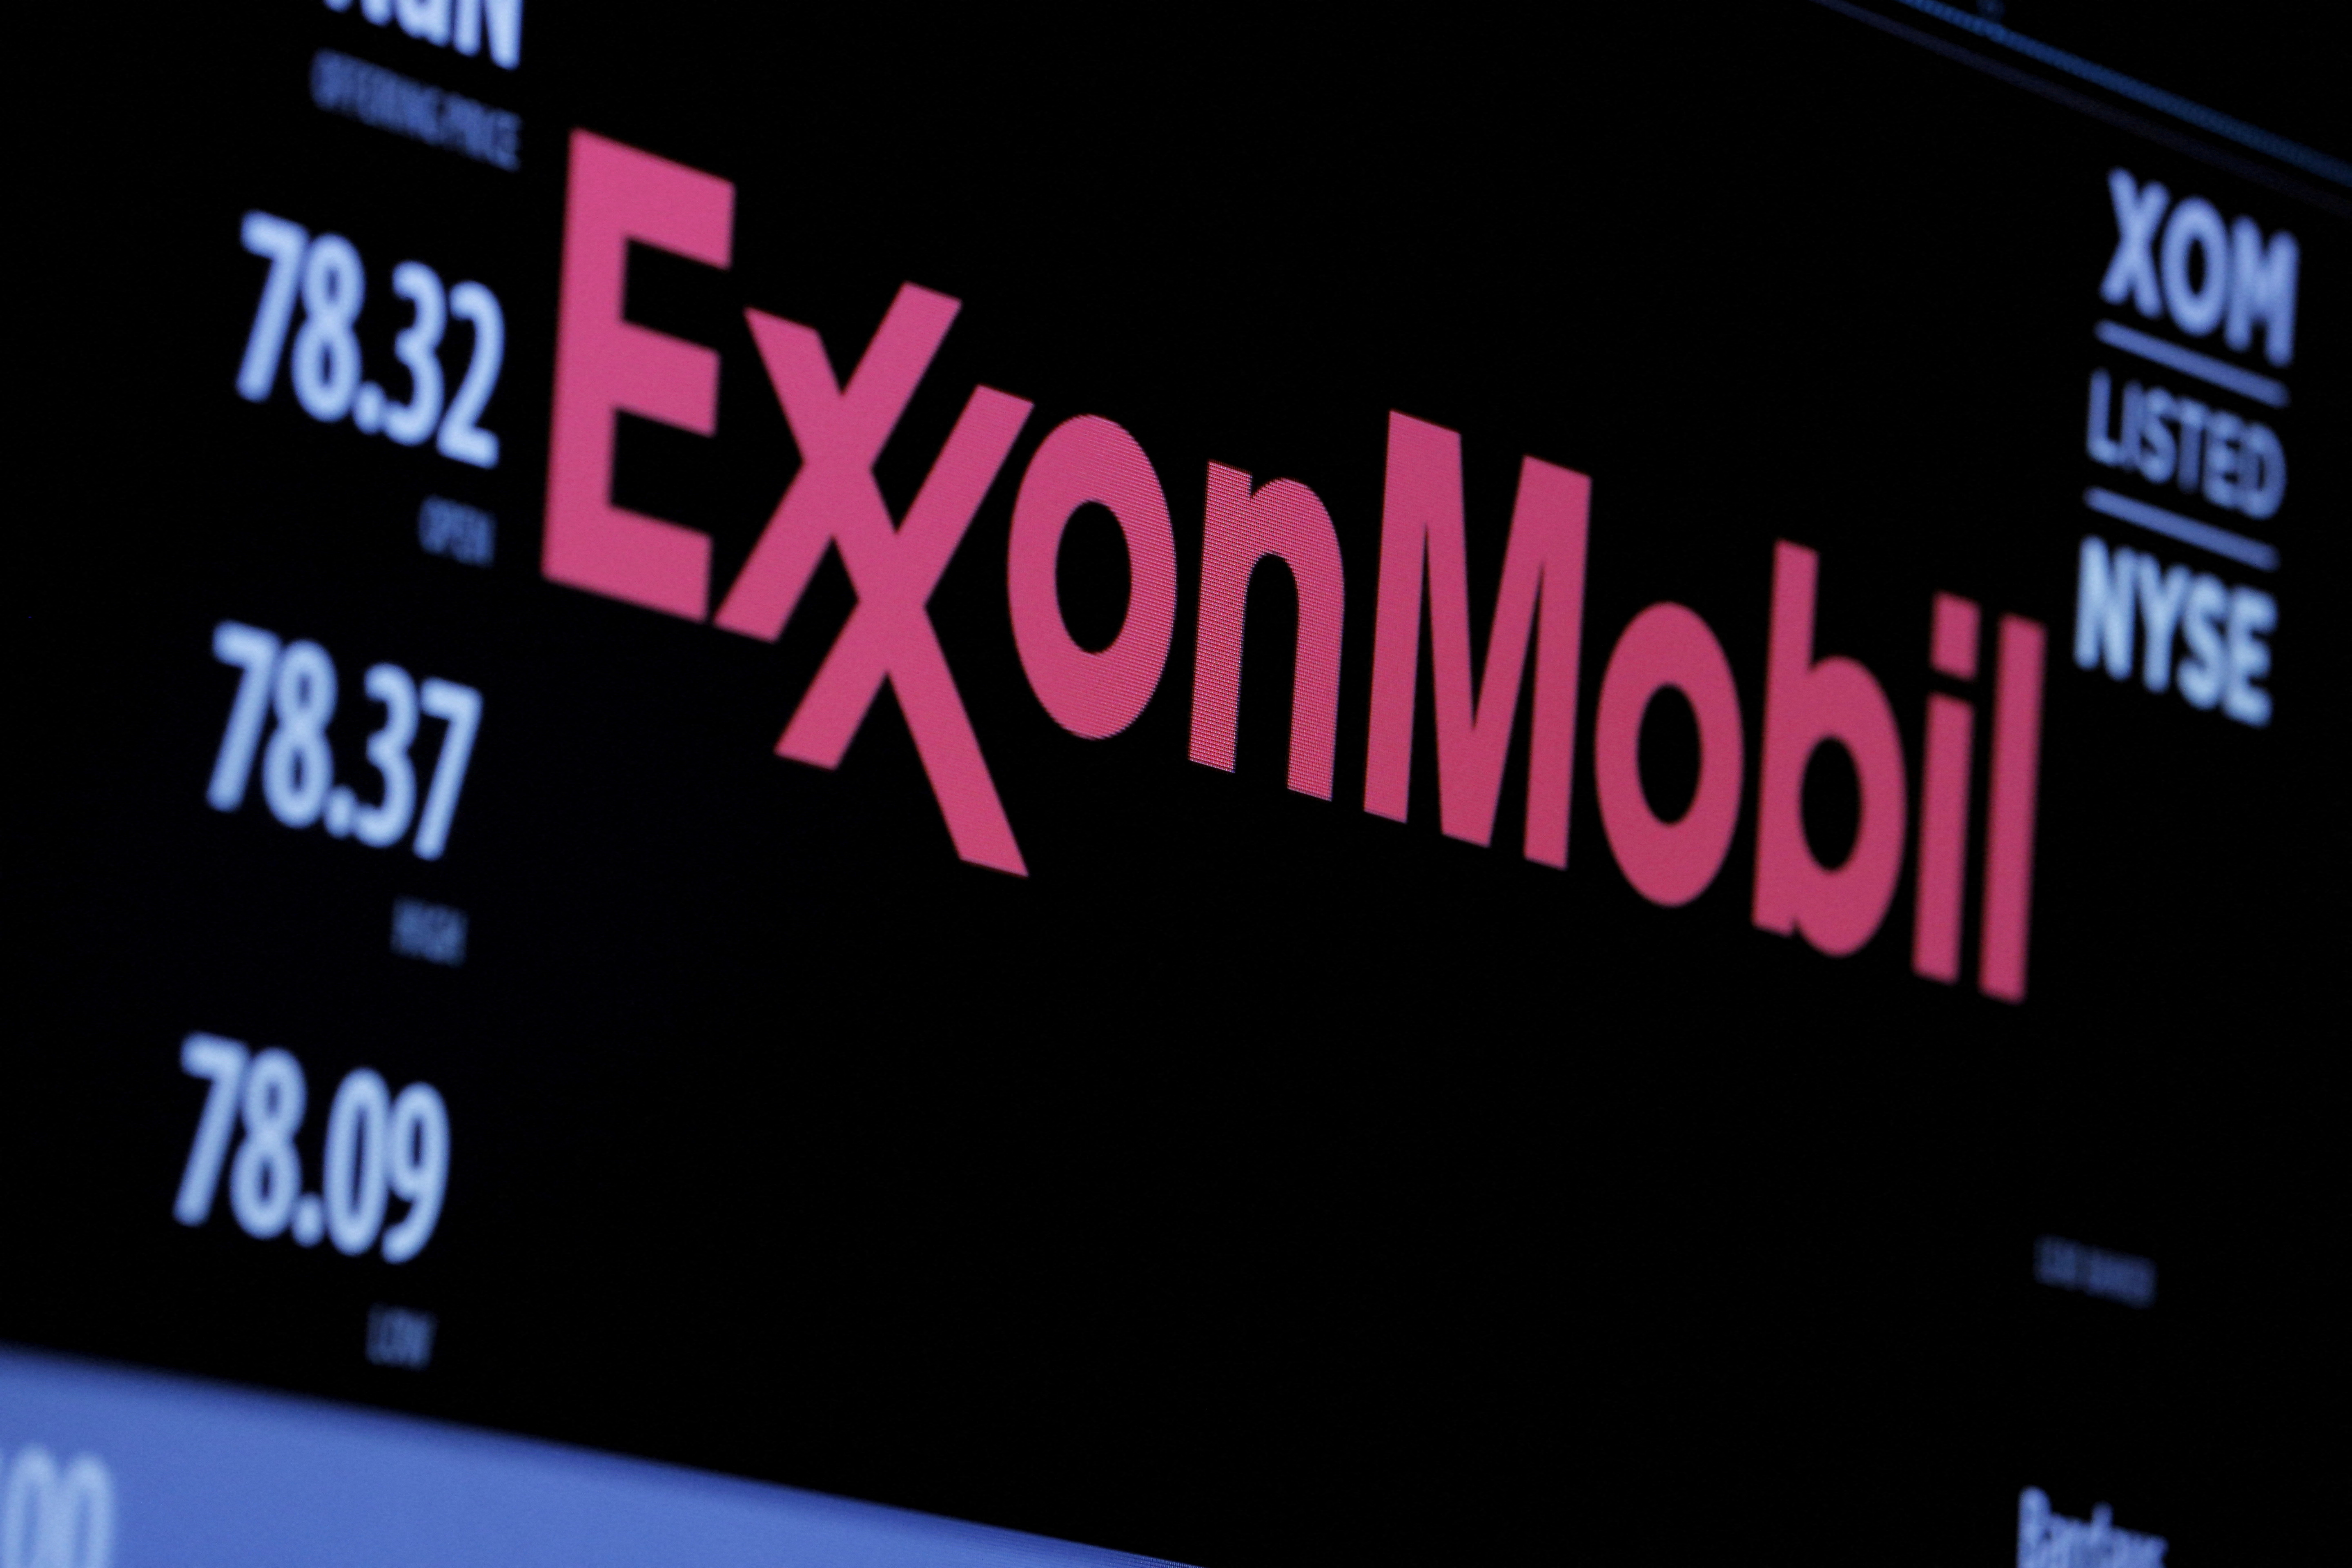 The ExxonMobil logo appears on a screen above the floor of the New York Stock Exchange in New York